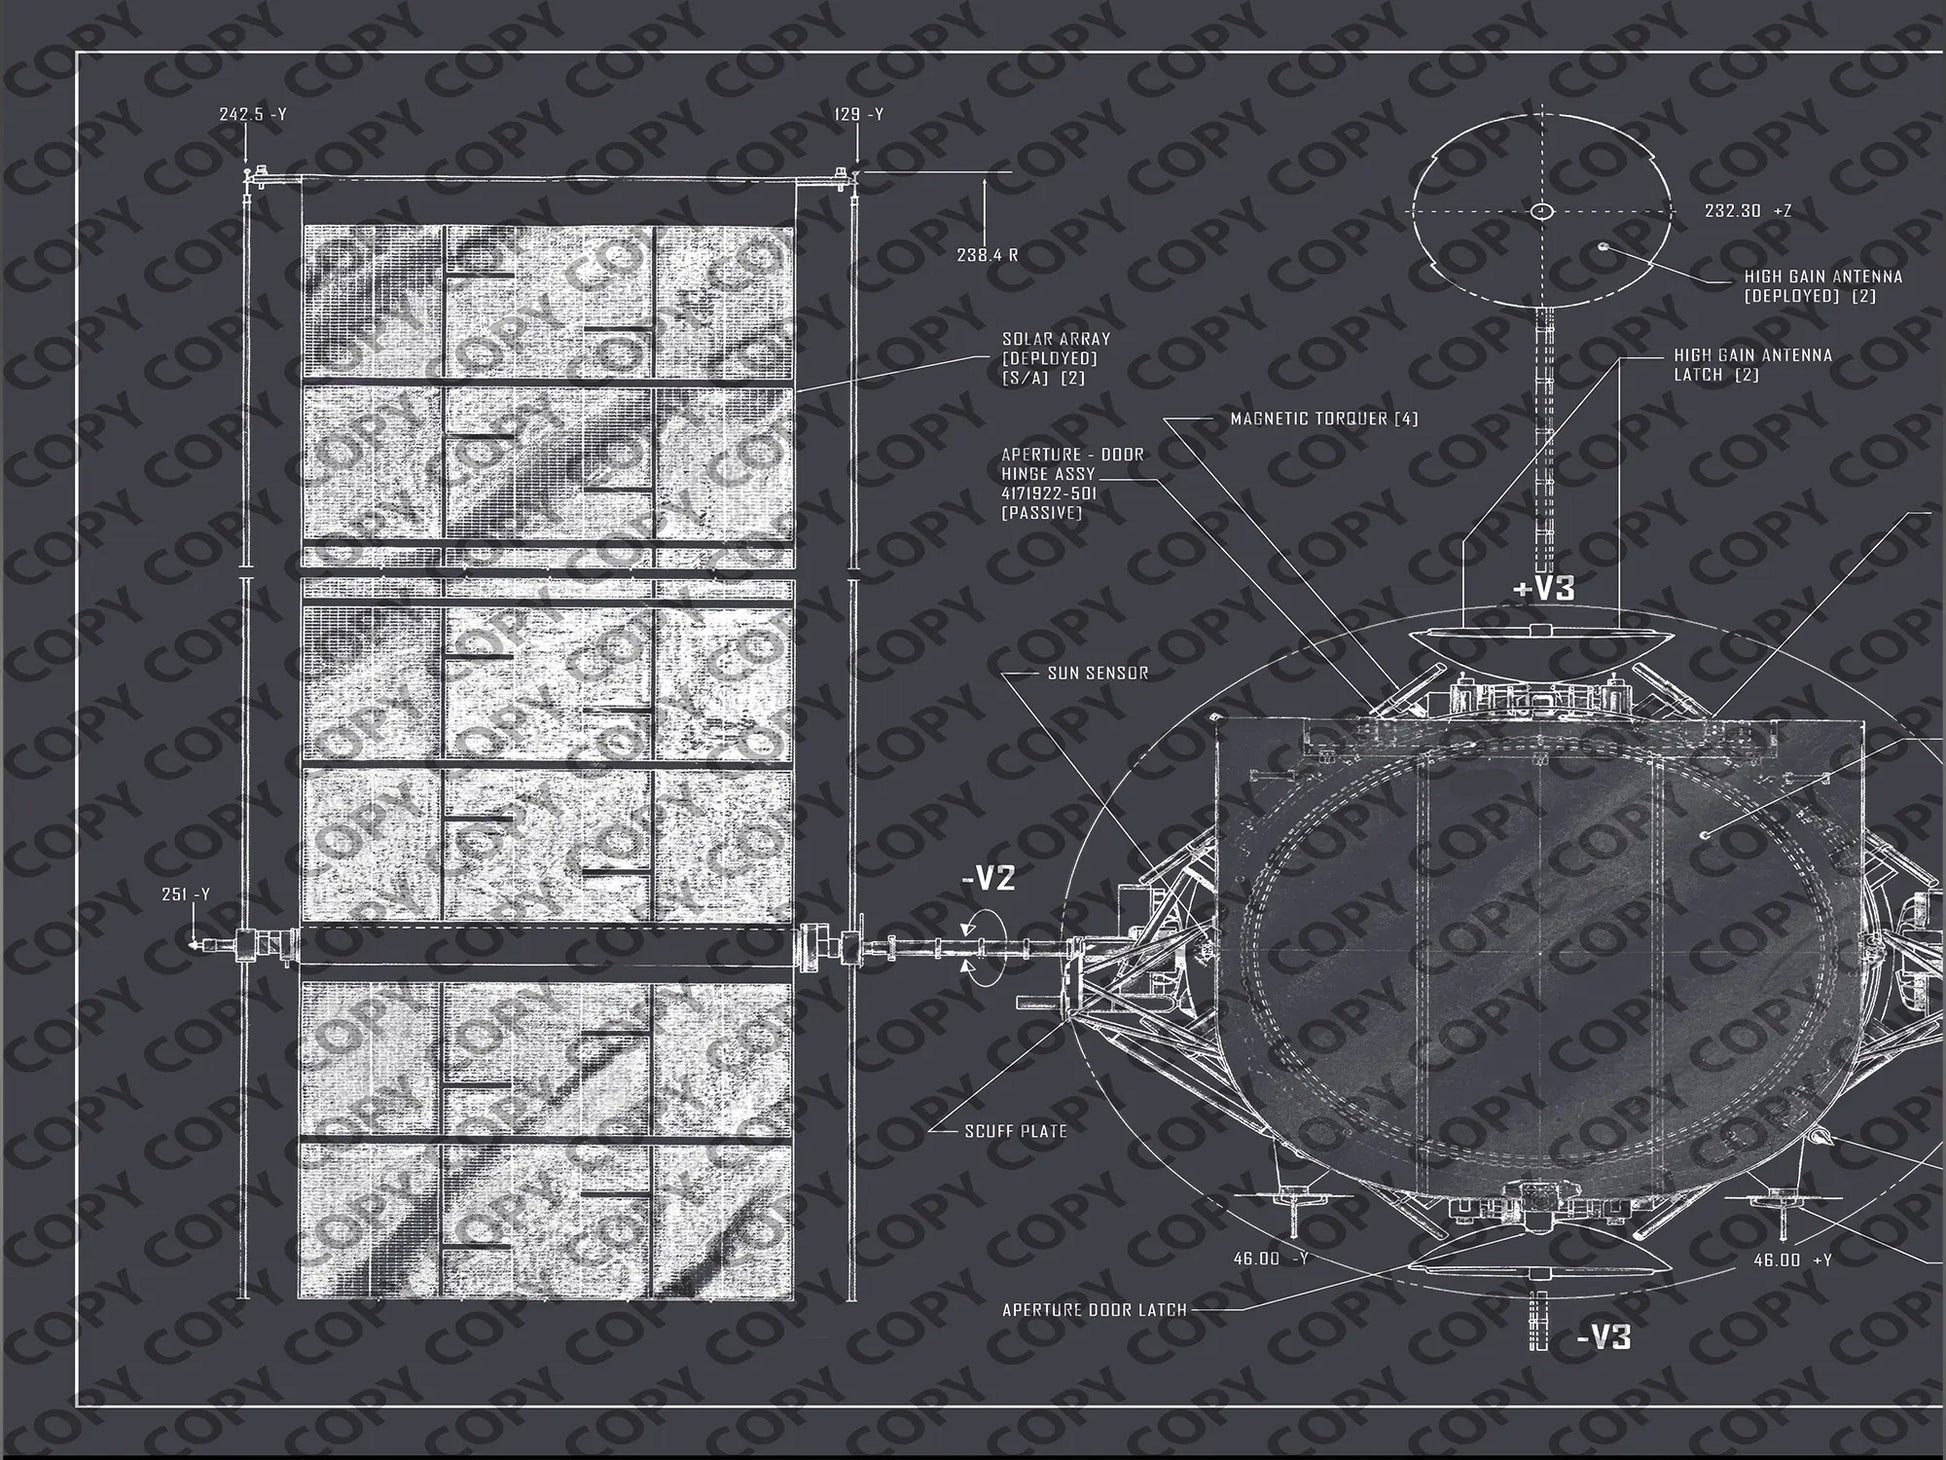 Hubble Space Telescope Blueprint | Rocket Blueprint Posters | A close-up view of the Hubble Space Telescope blueprint, highlighting technical diagrams and labels. The section includes components such as the magnetic torquer, sun sensor, and cuff plate on a dark background.